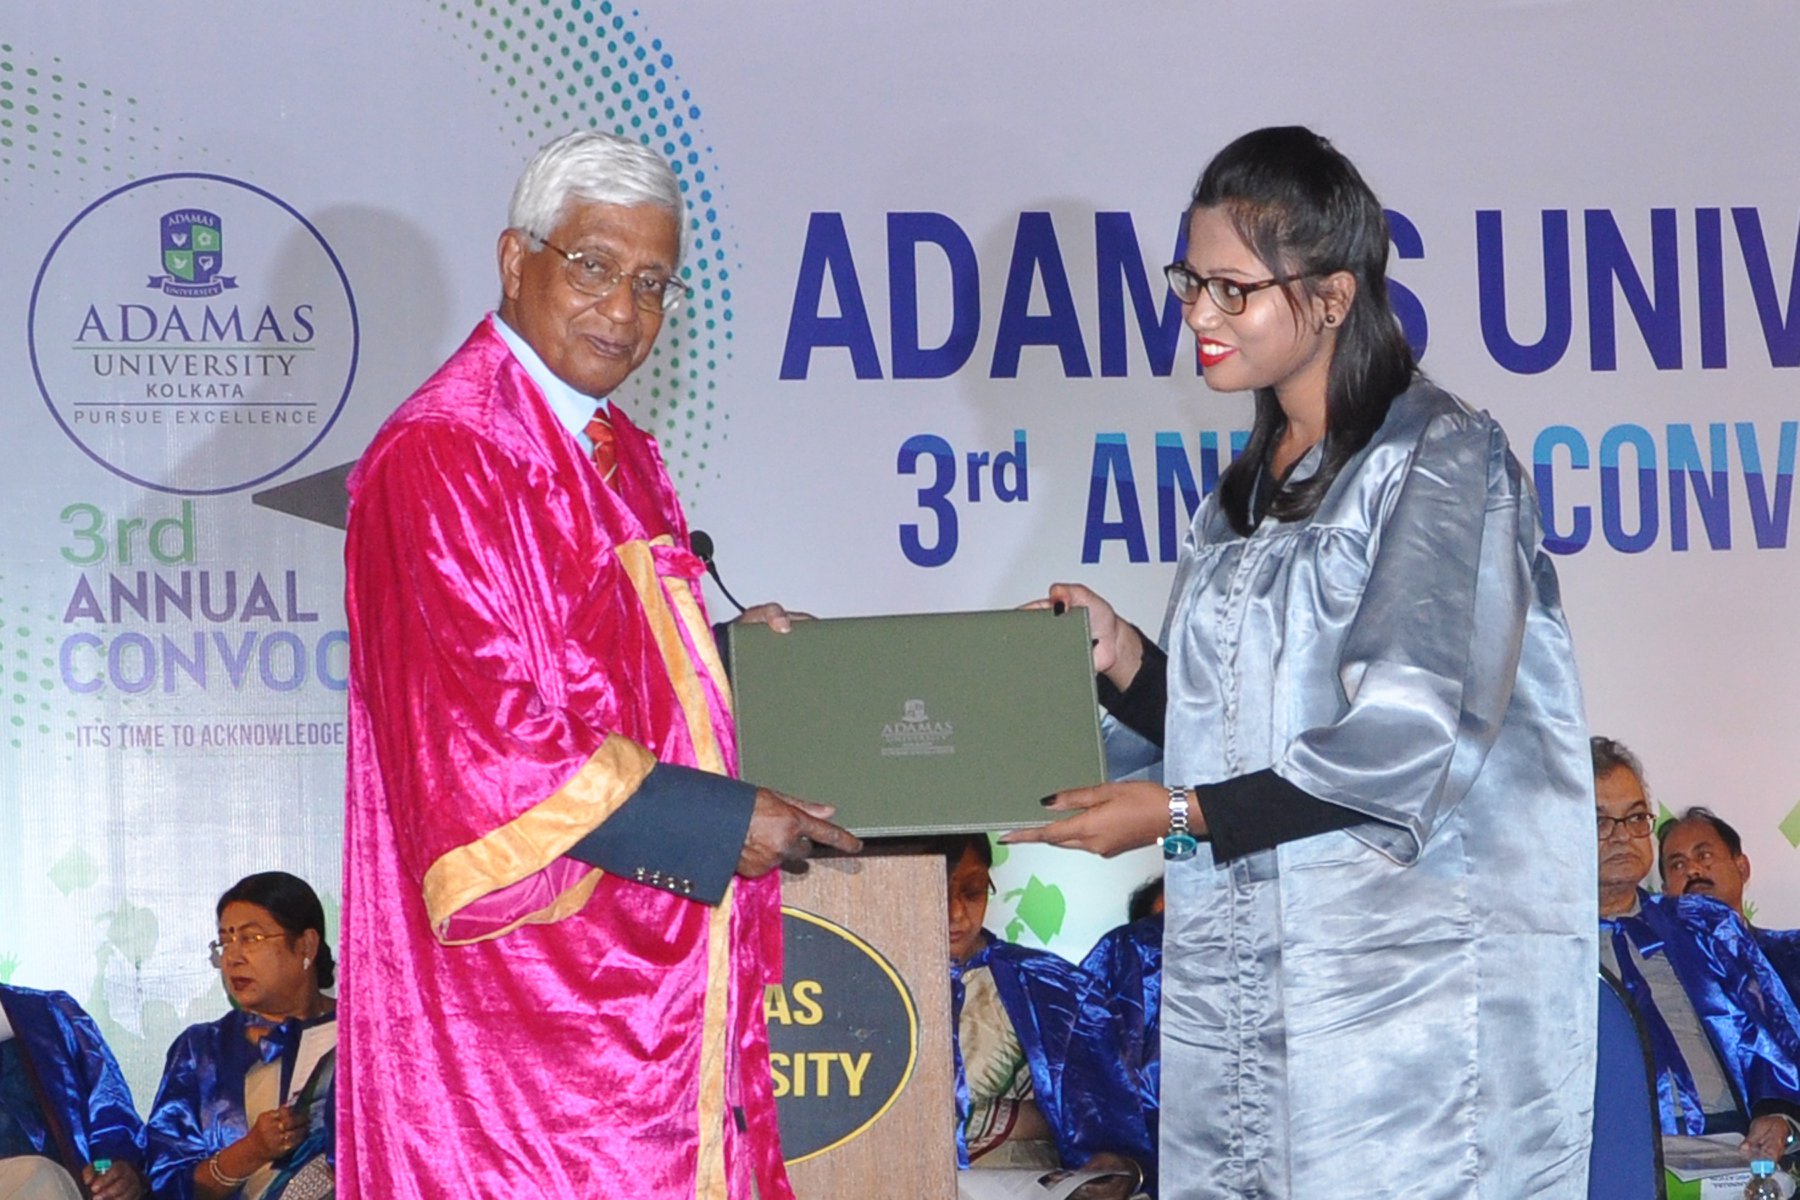 3rd Convocation